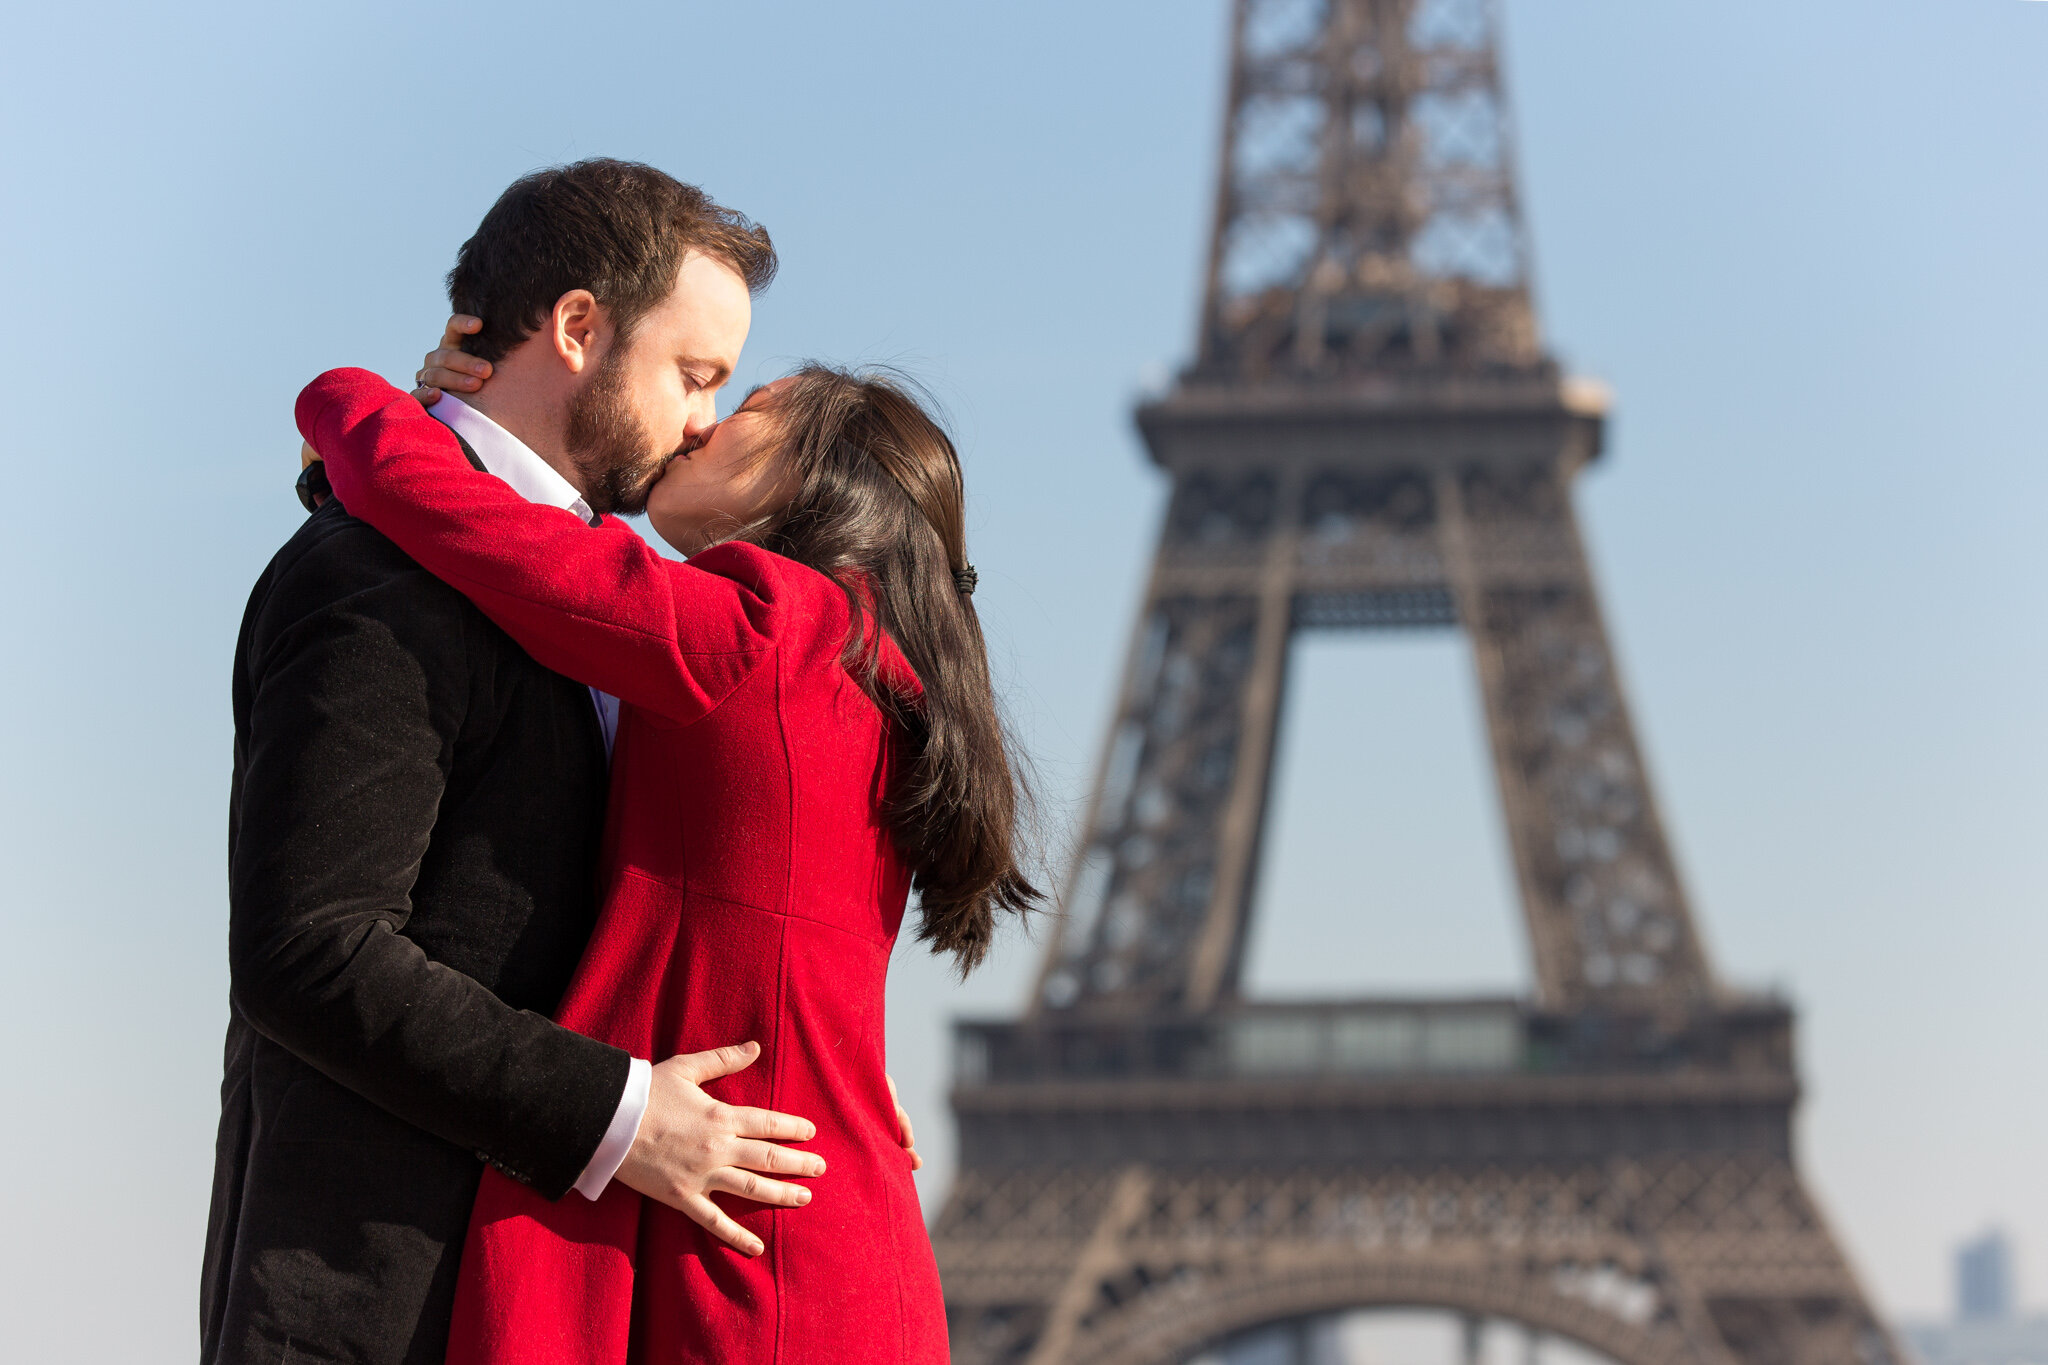  couple-in-love-kiss-in-front-of-eiffel-tower 